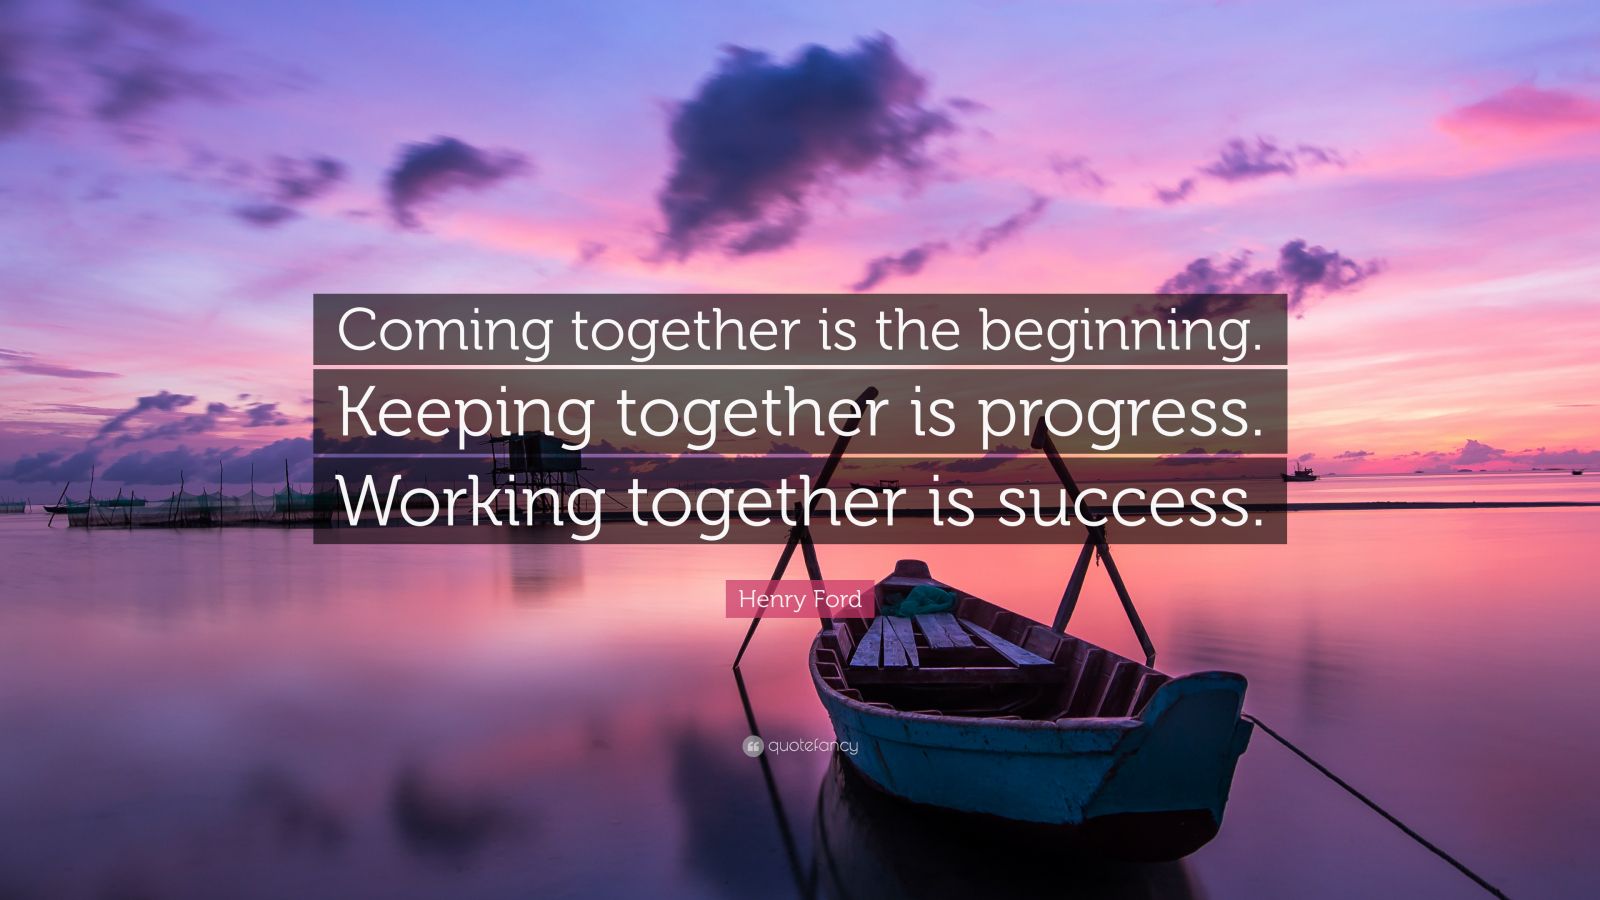 Henry Ford Quote: “Coming together is the beginning. Keeping together